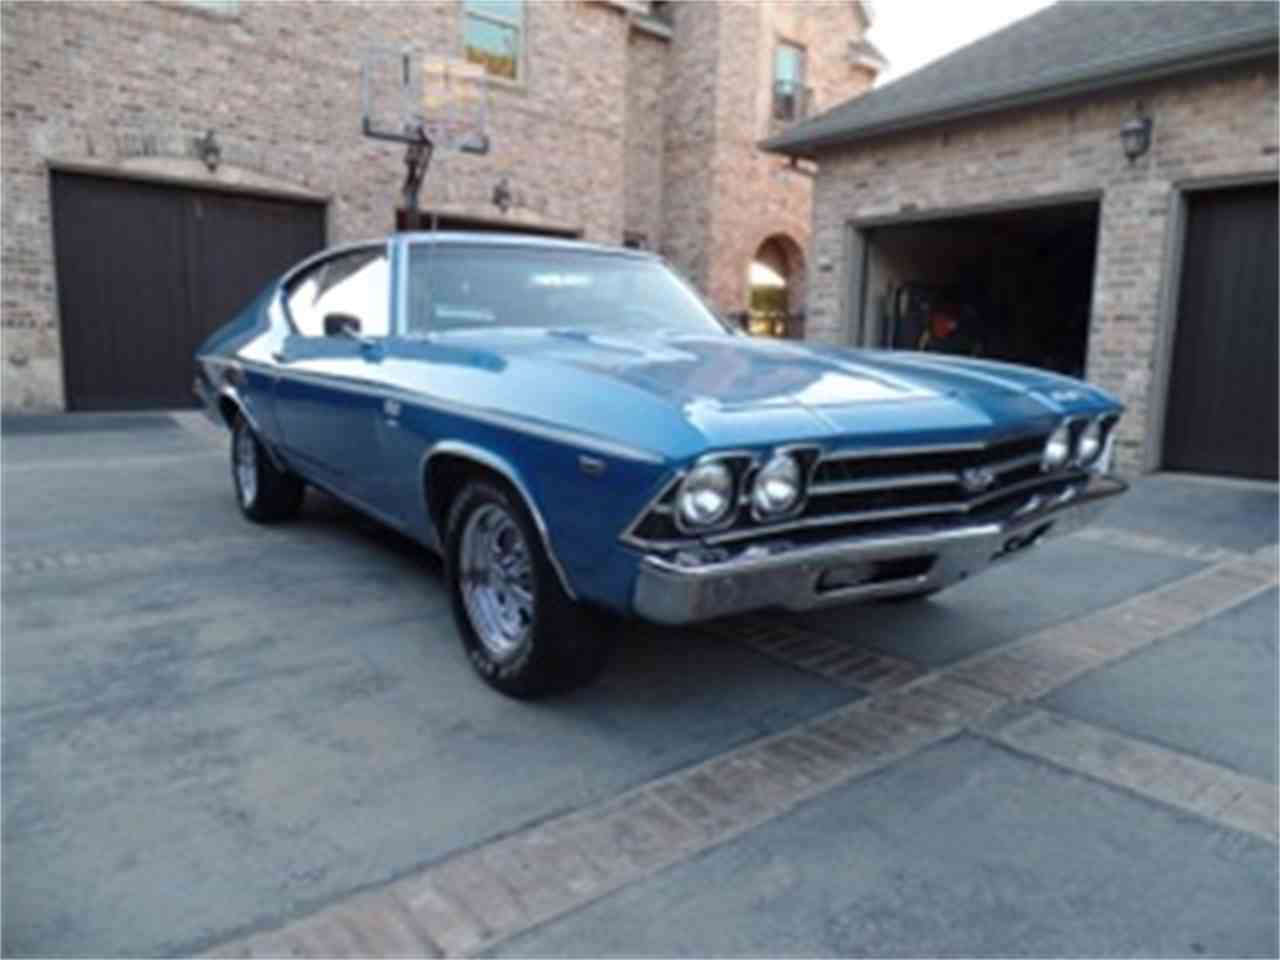 Nice wallpapers Chevrolet Chevelle 1280x960px